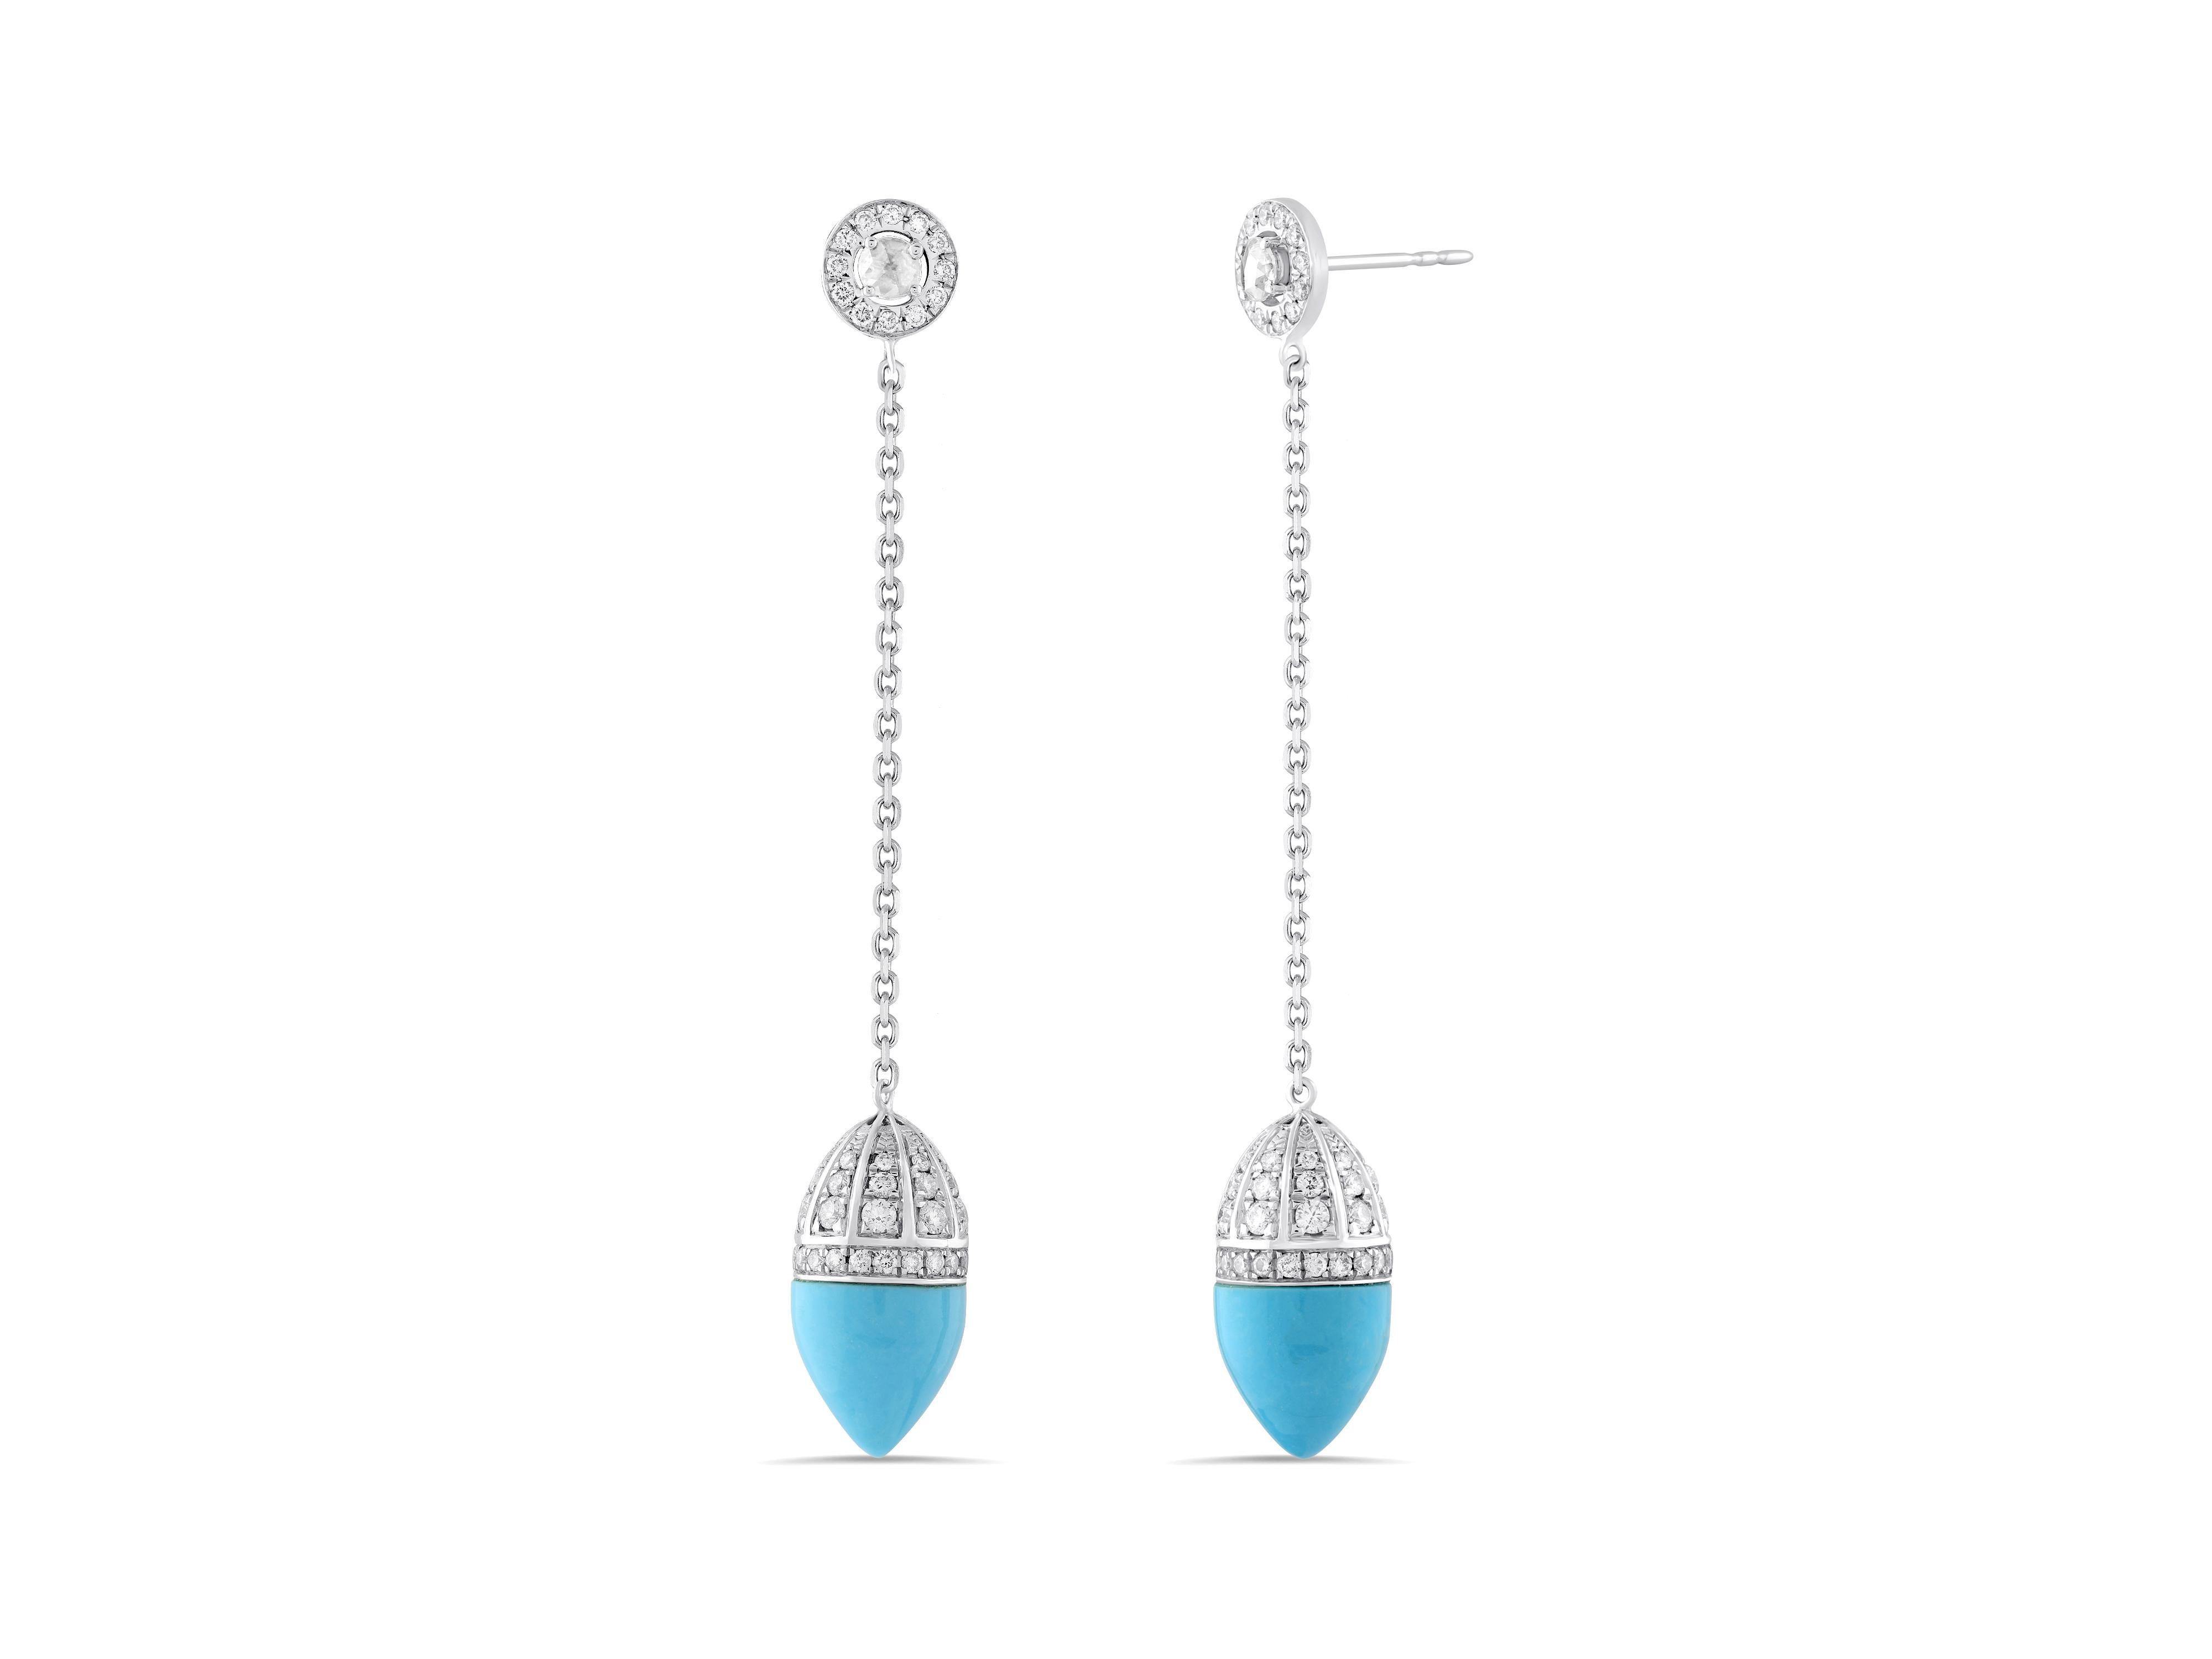 Minimalistic design and hand-crafted gemstones blend to create the elegance of the Atelo Arrow Collection.

These modern earrings uses stunning, hand-cut turquoise- with its vibrant yet calming colour- carved like the tip of an arrow.

White,